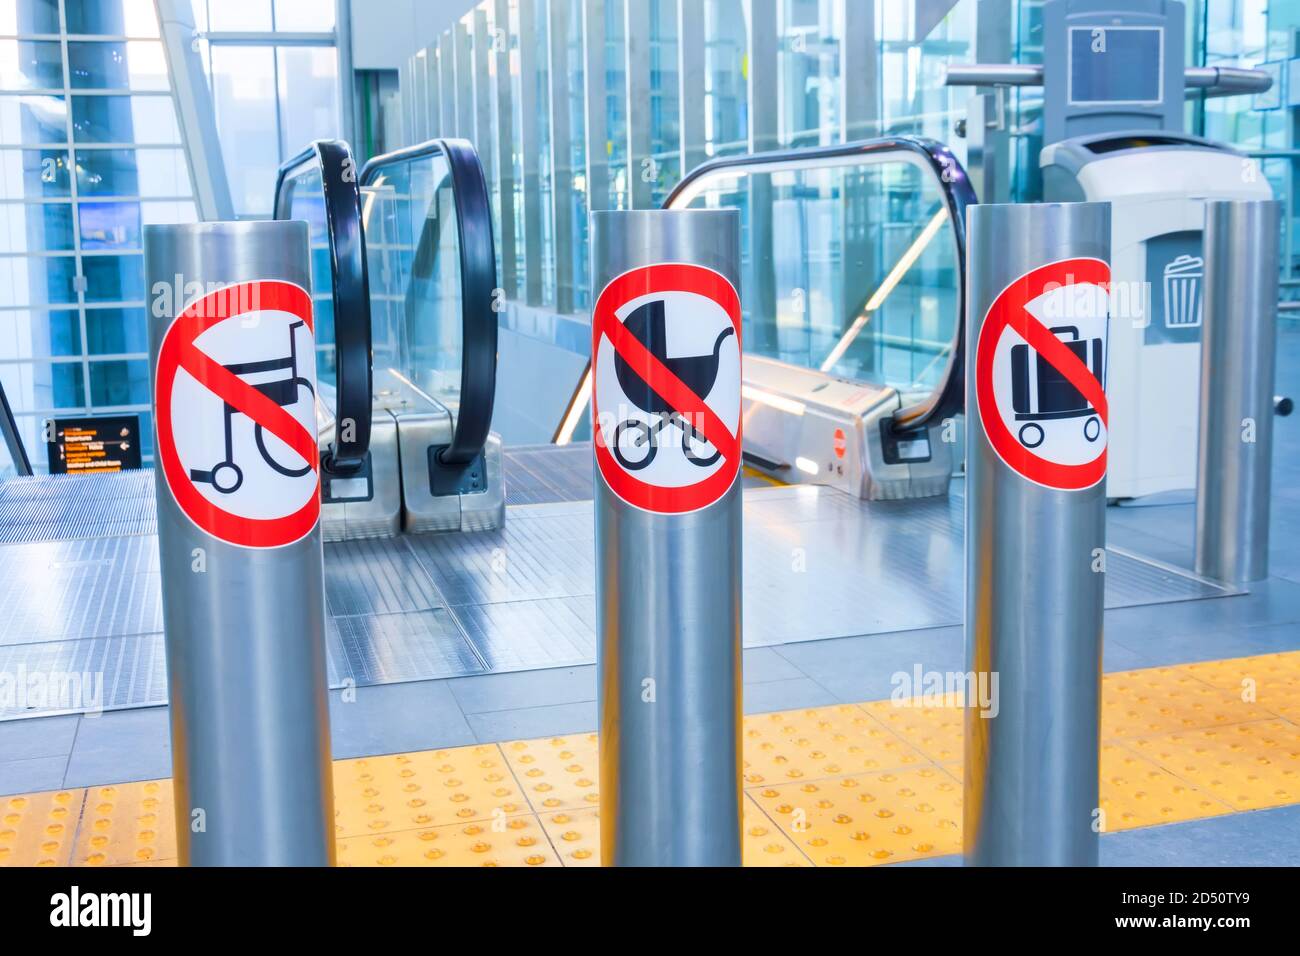 Prohibition signs for luggage, suitcases, carts and baby carriages on an escalator in a public building Stock Photo